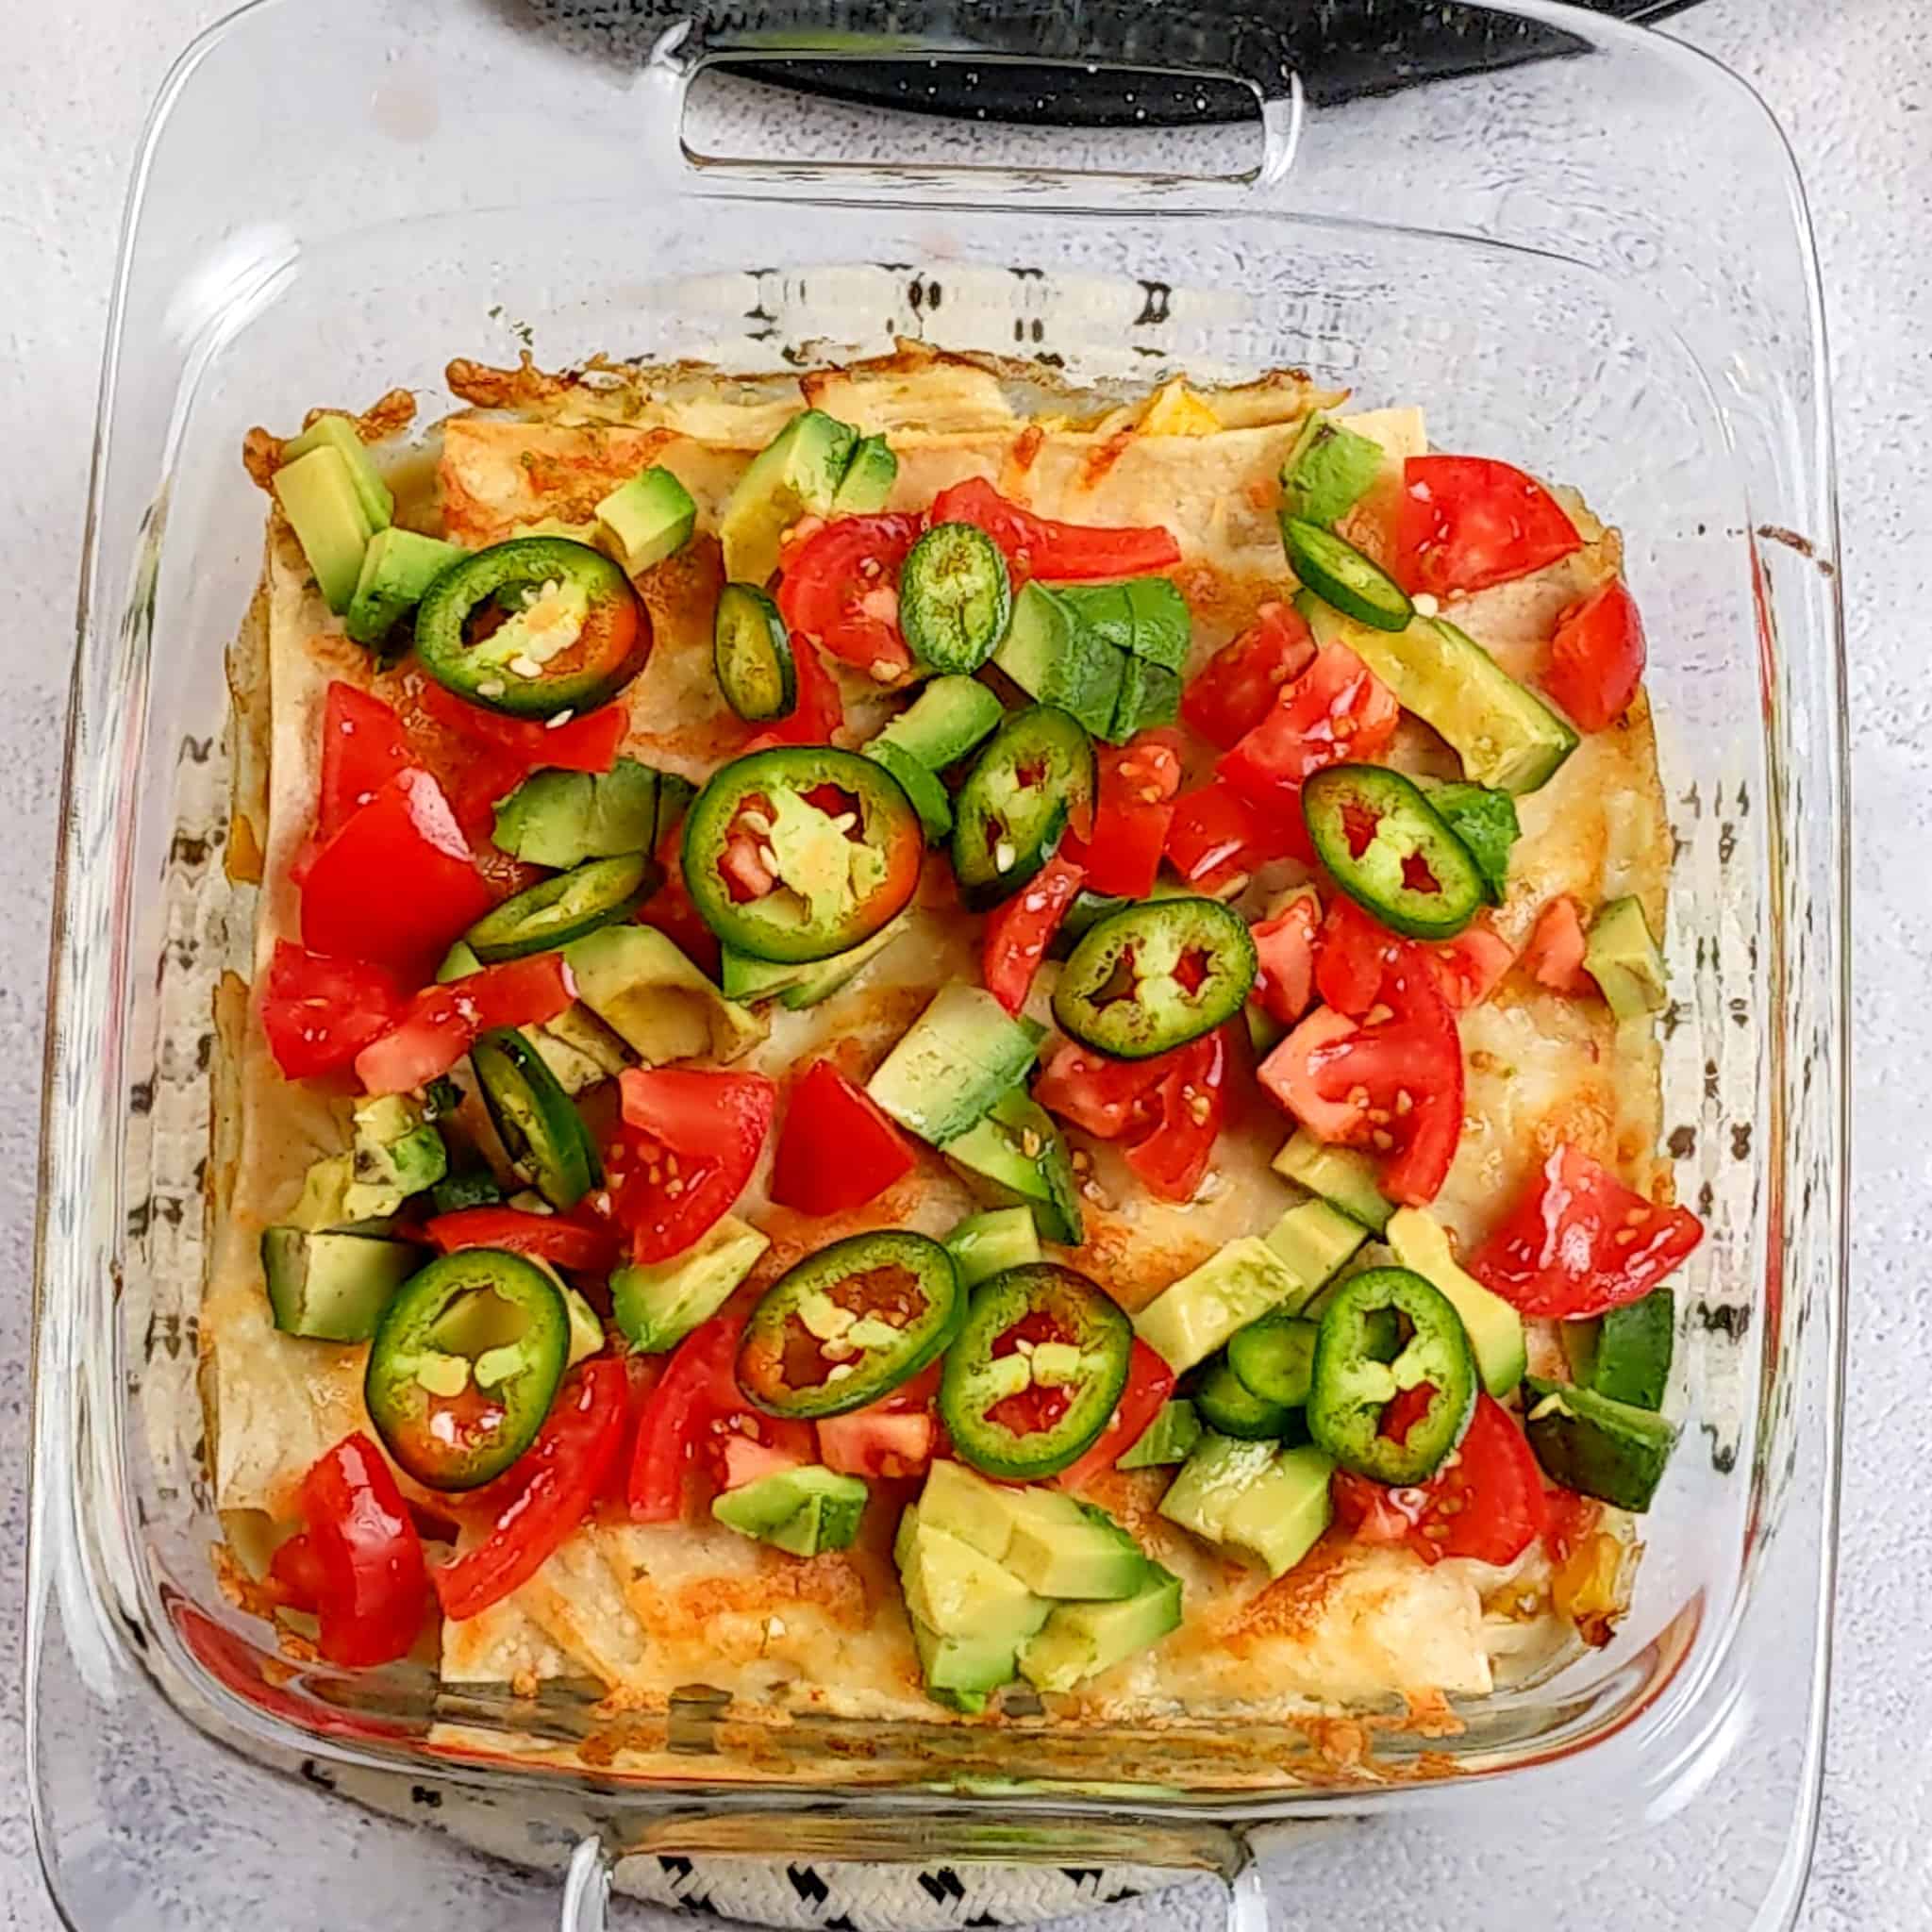 sliced jalapeno rings, diced tomatoes, and diced avocado pieces on top of the baked chicken tortilla casserole